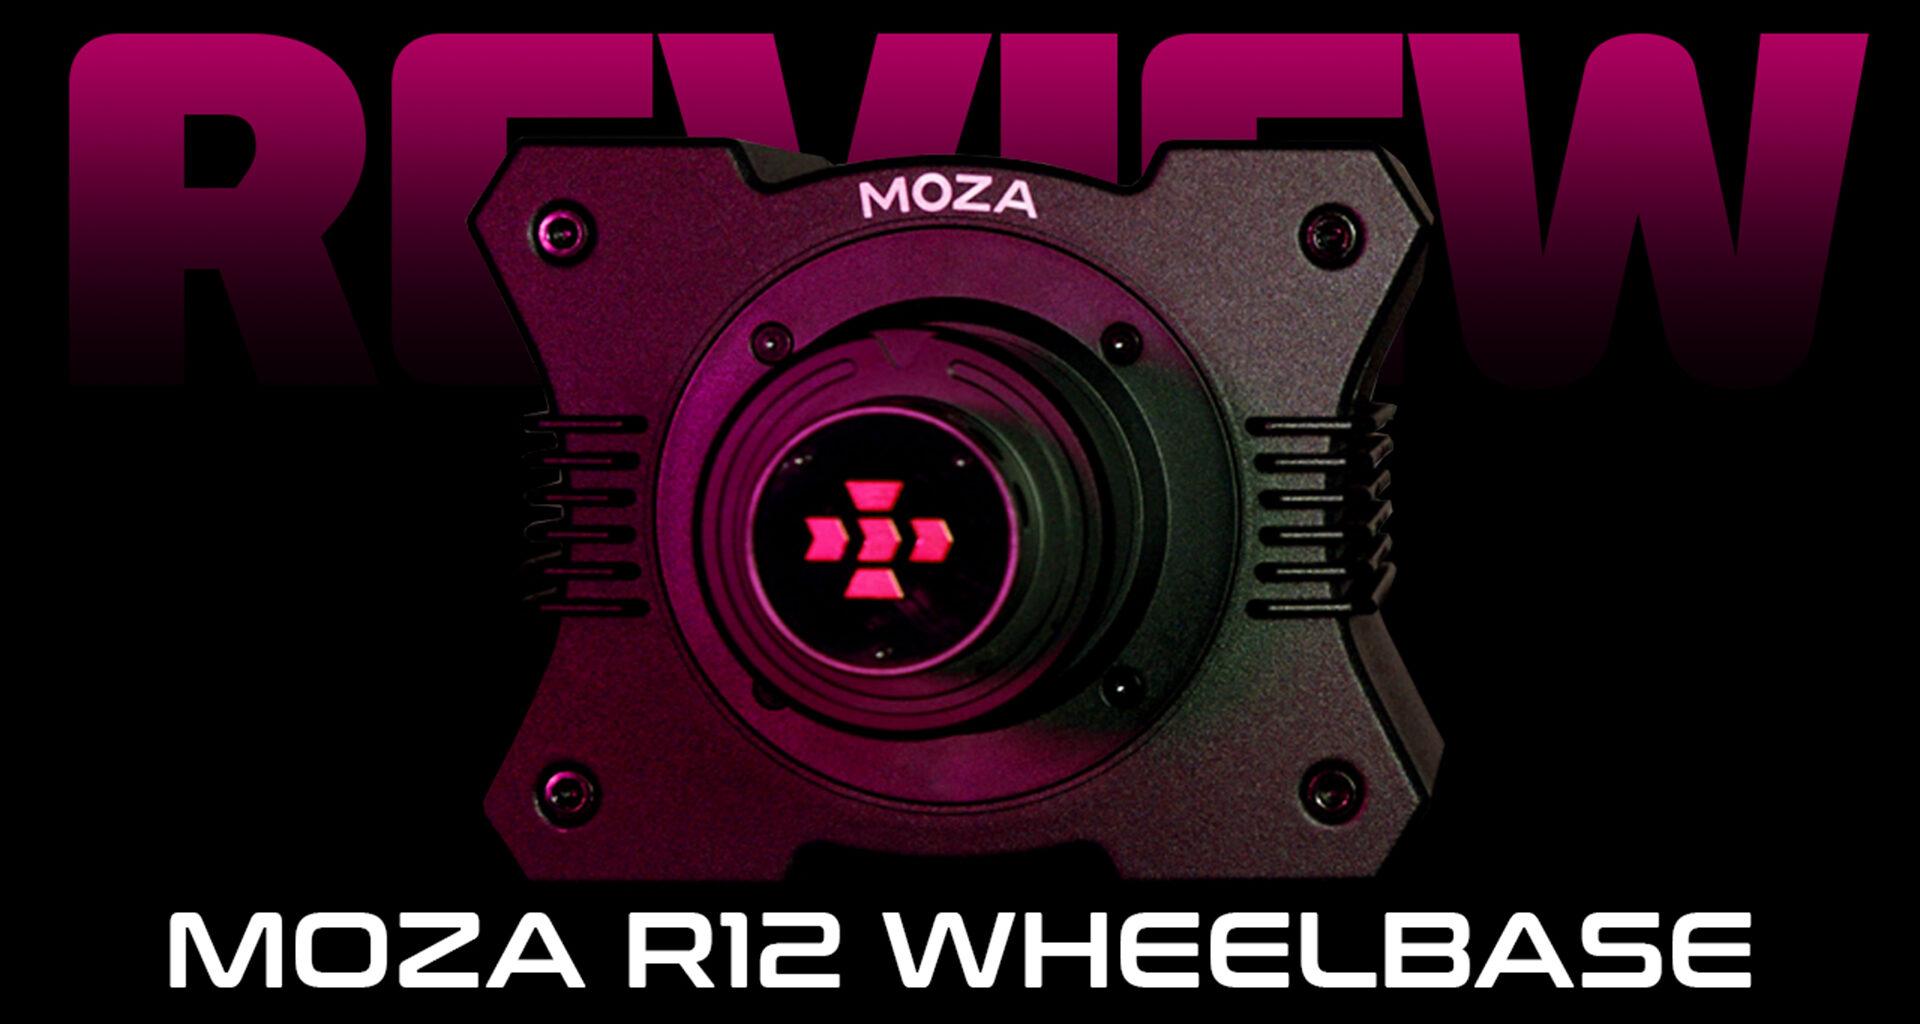 Moza R12 Direct Drive Wheelbase review: a significant step forward